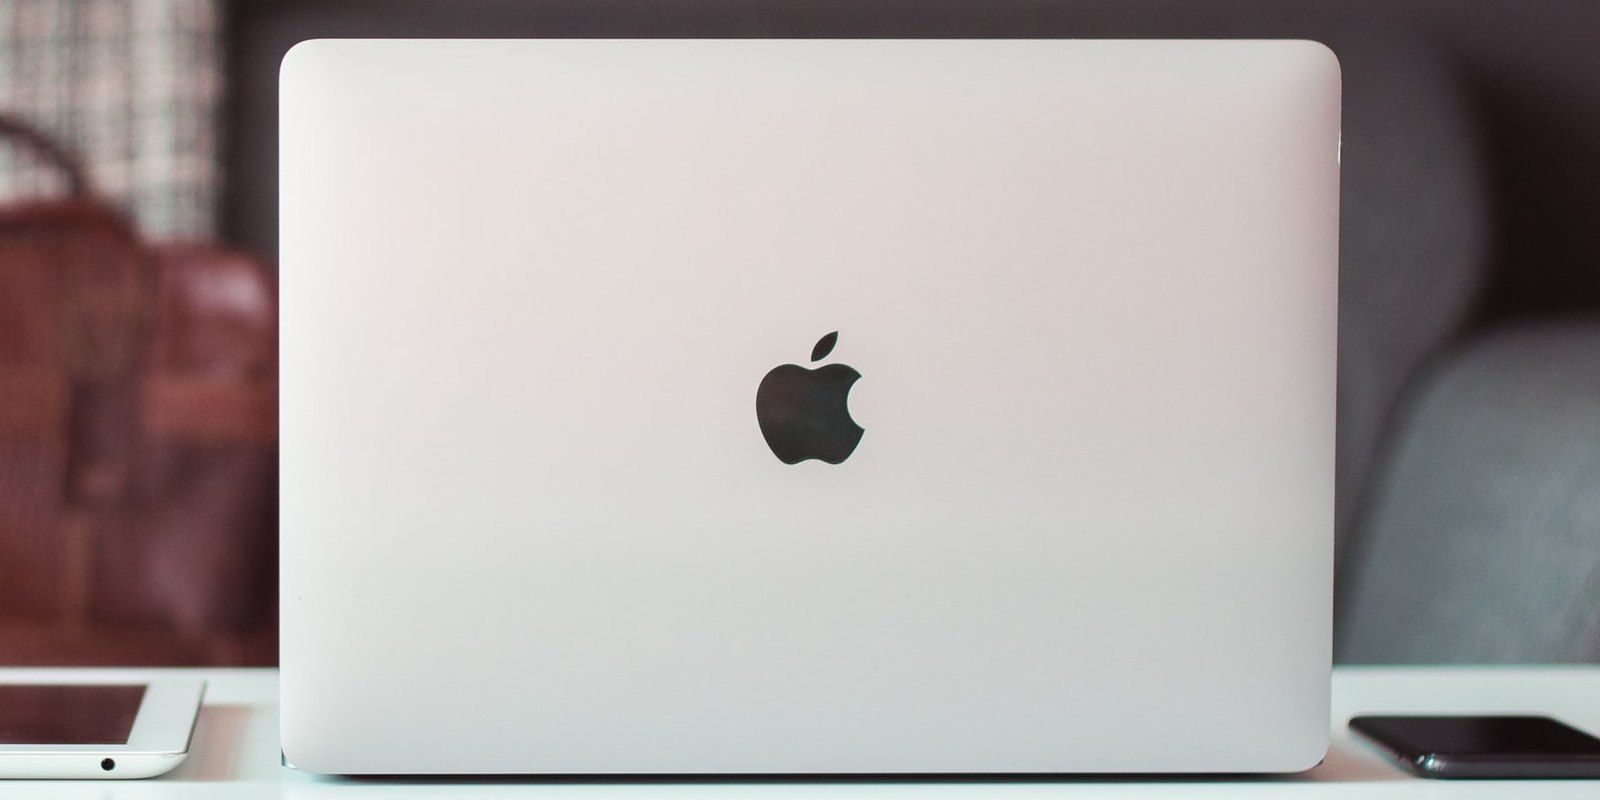 MacBook Air by Jonathan Francisca for Unsplash